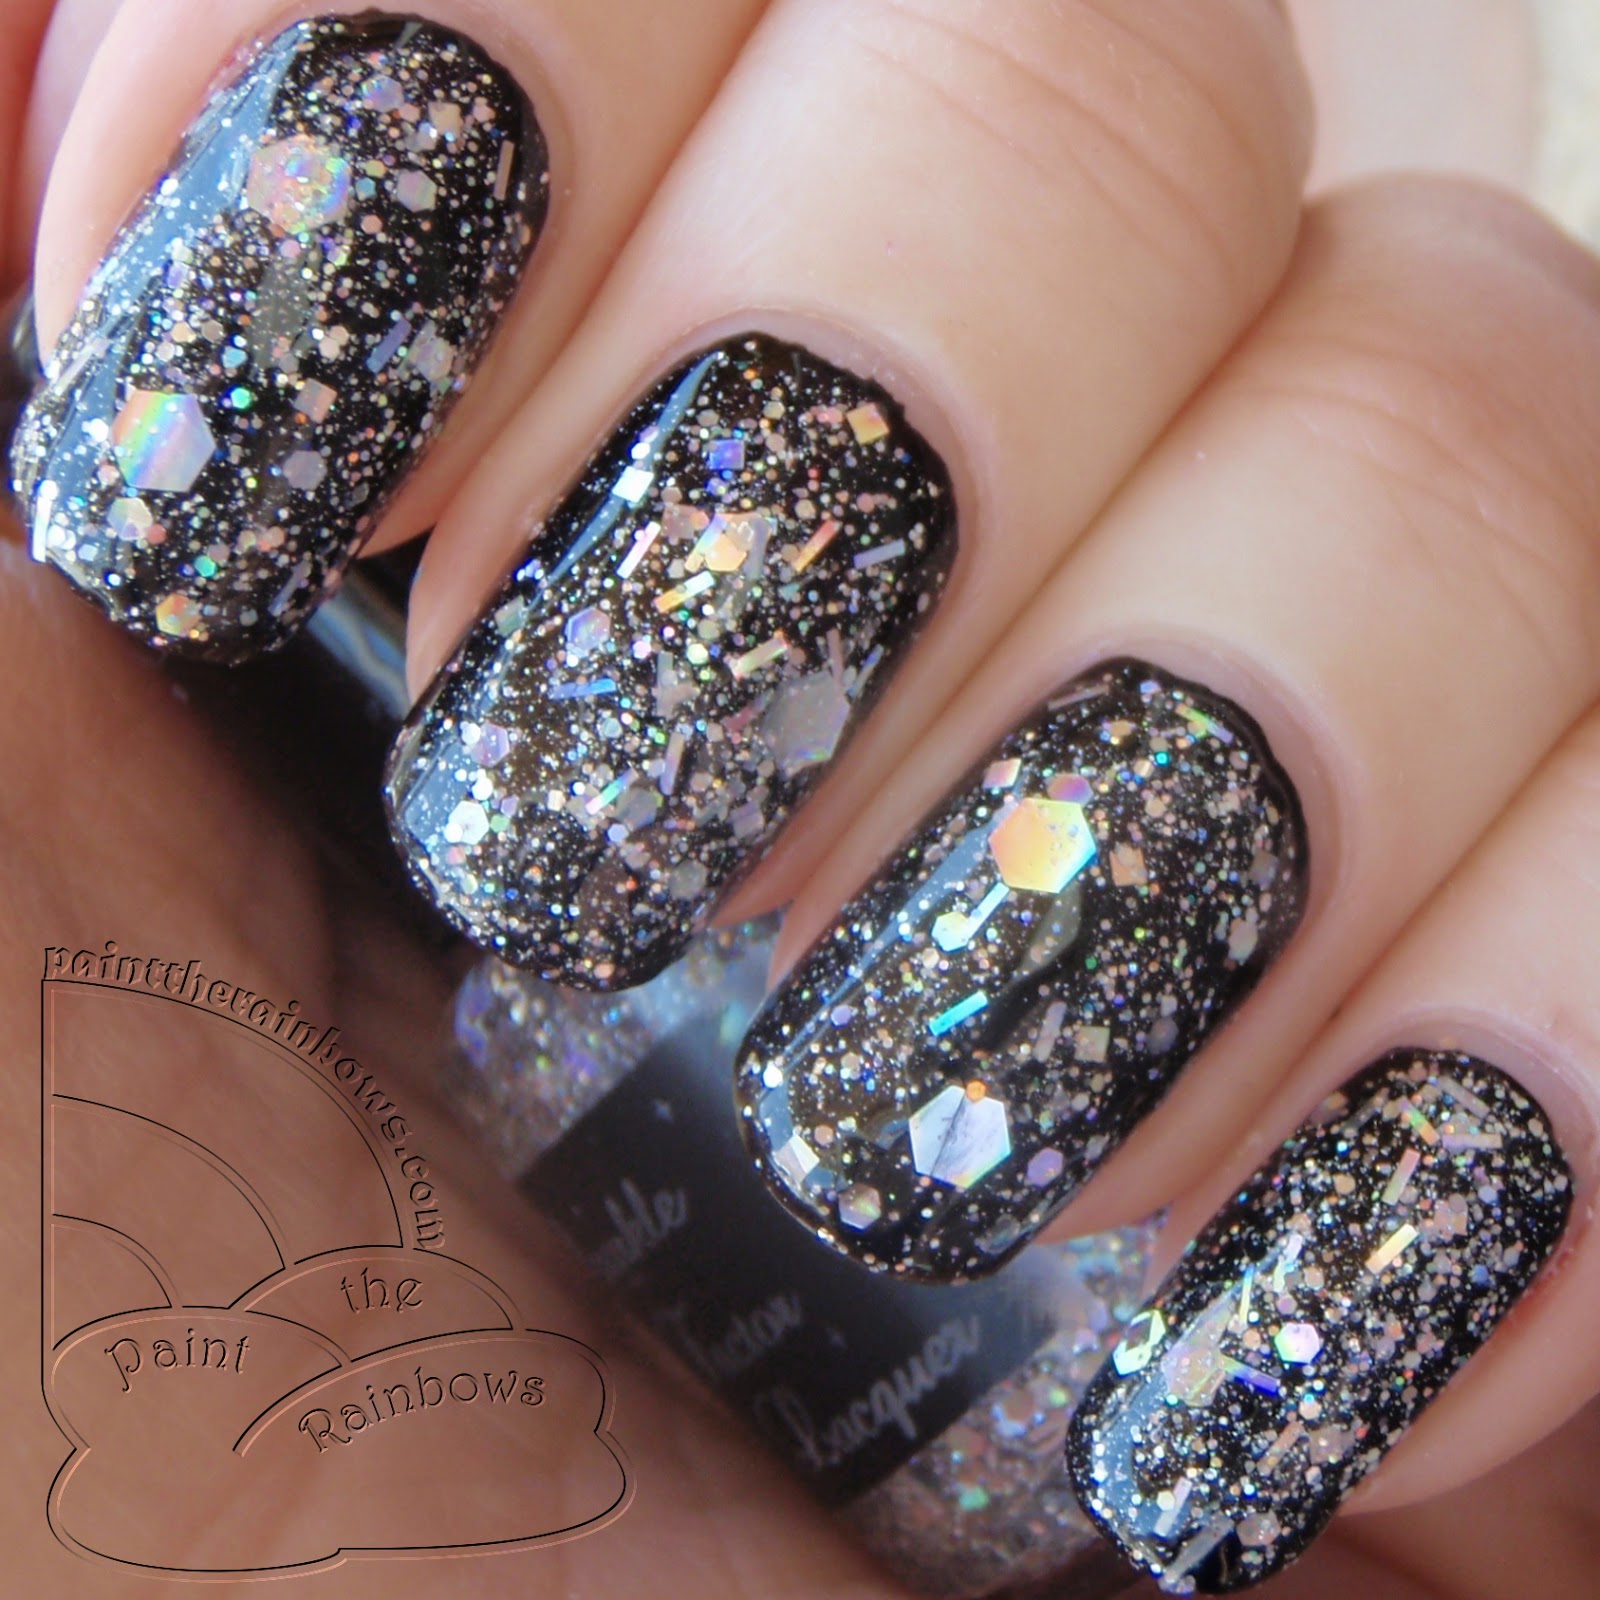 paint the rainbows ★彡: Sparkle Factor Lacquer Swatches and Review